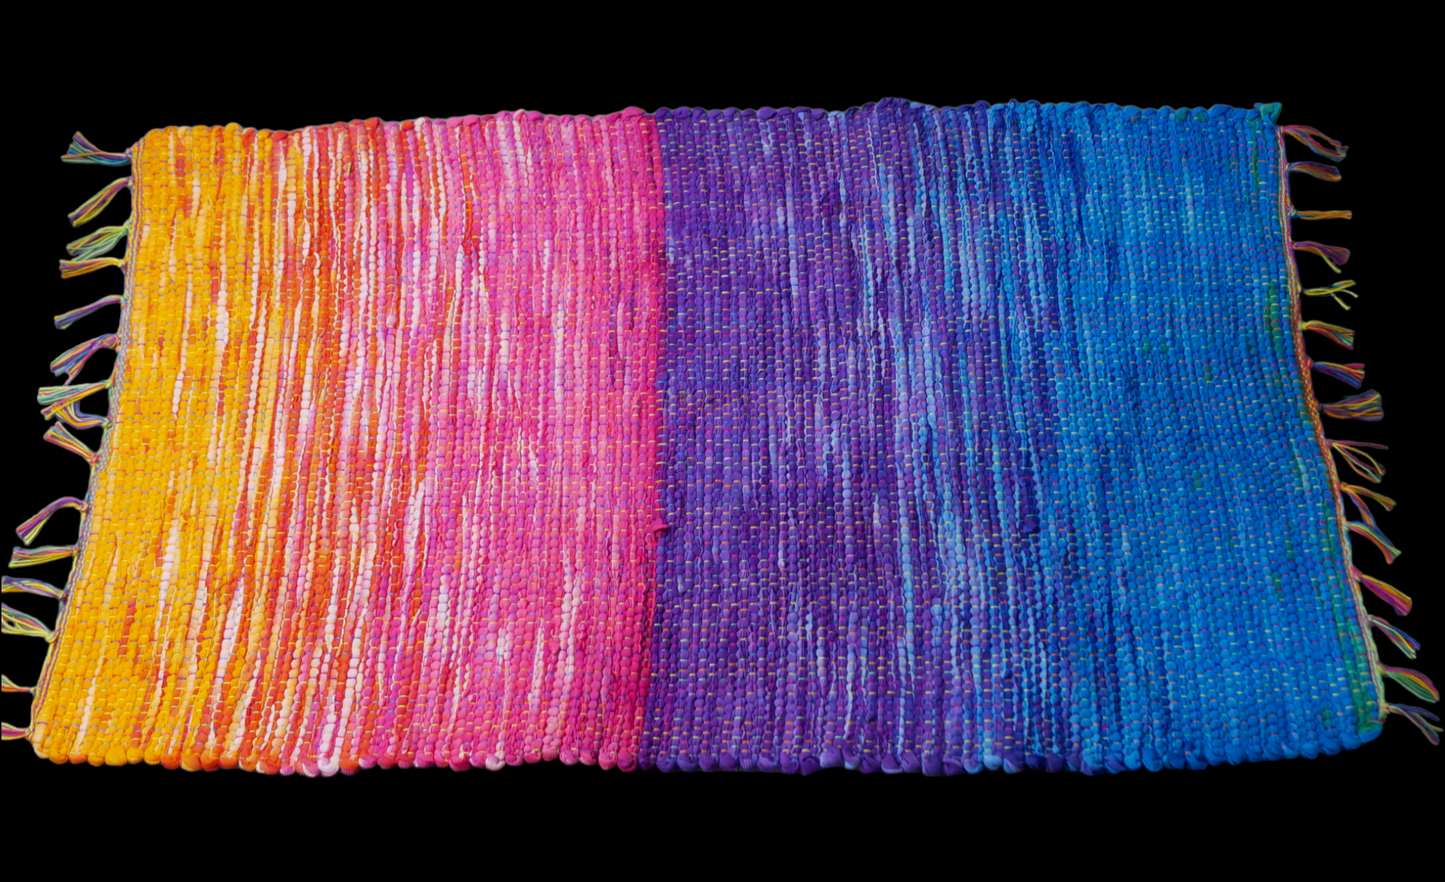 Rag rug - 23 inches x 39 inches